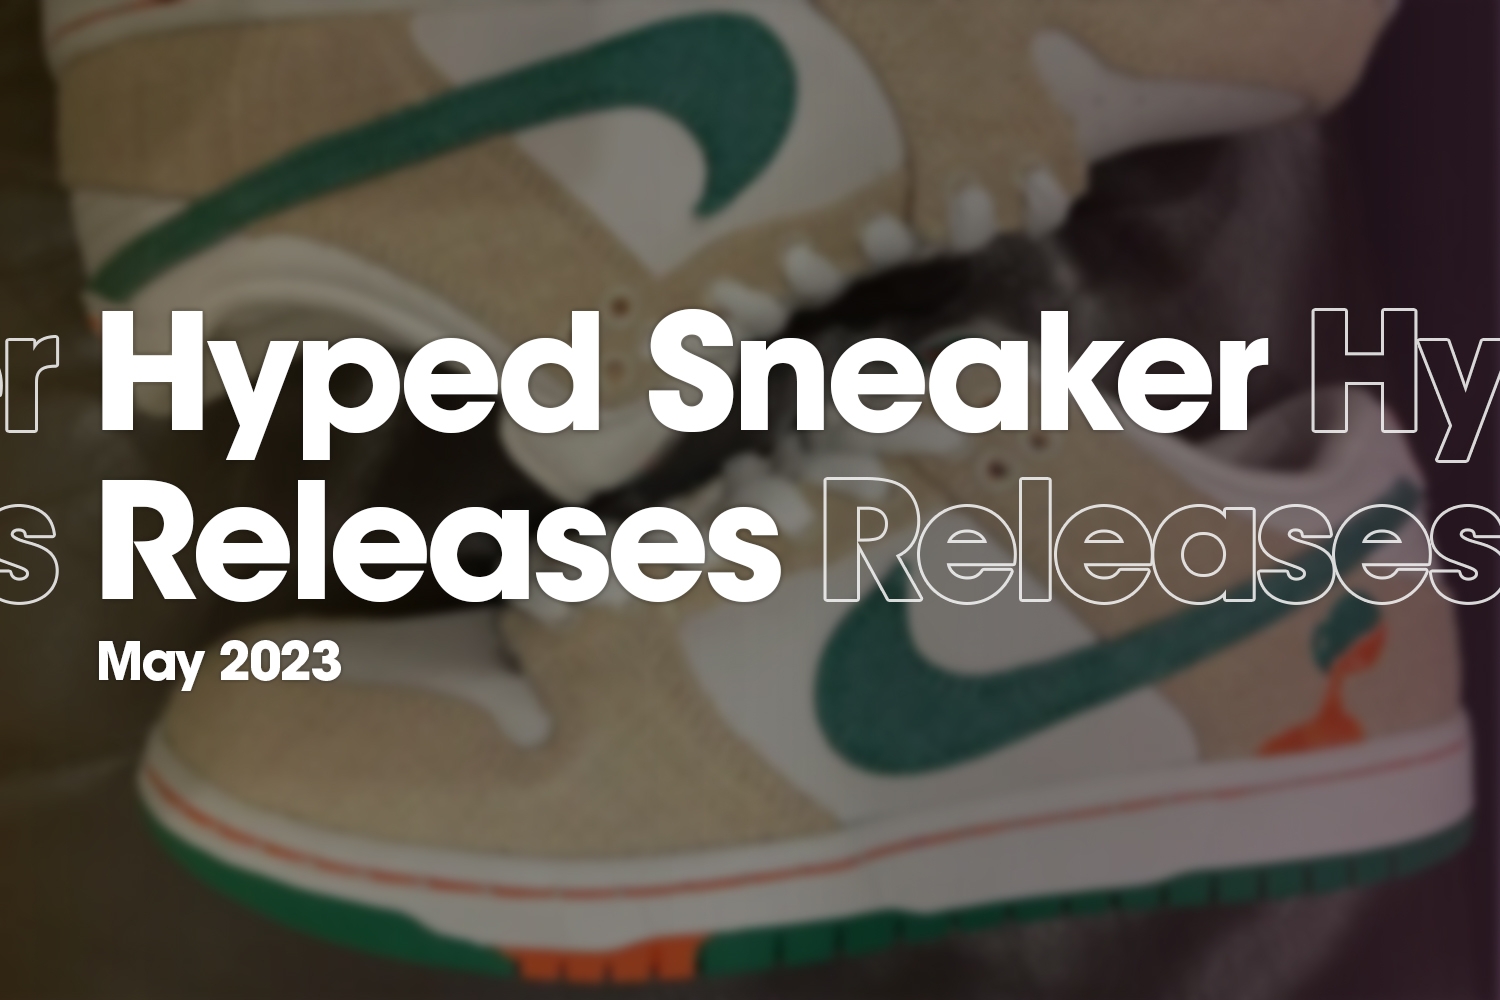 Hyped Sneaker Releases of May 2023